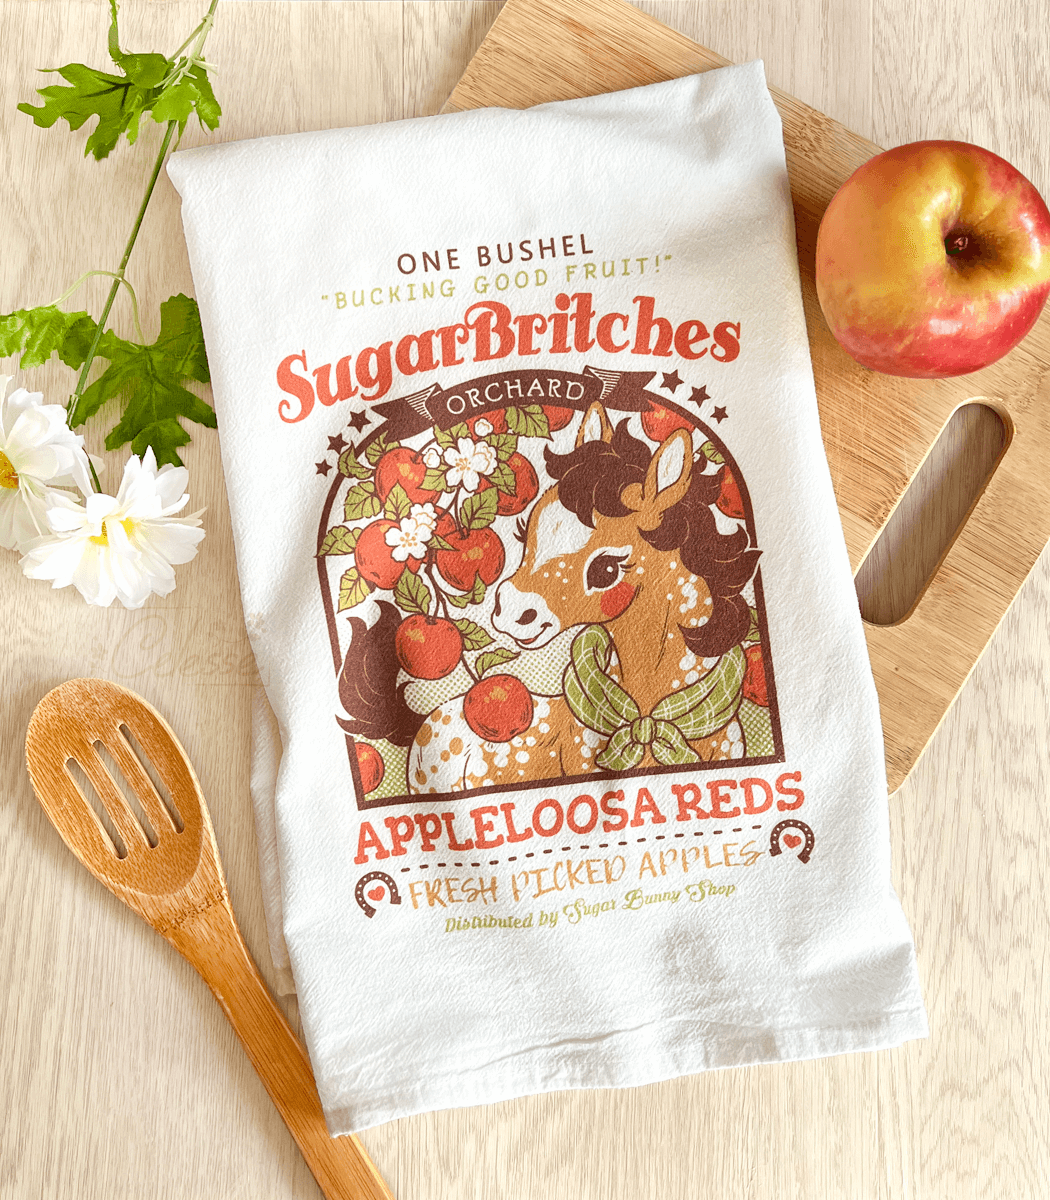 https://cdn.shopify.com/s/files/1/0060/6692/products/sugarbritches-orchard-appleloosa-reds-flour-sack-tea-towel.png?v=1679002275&width=1100